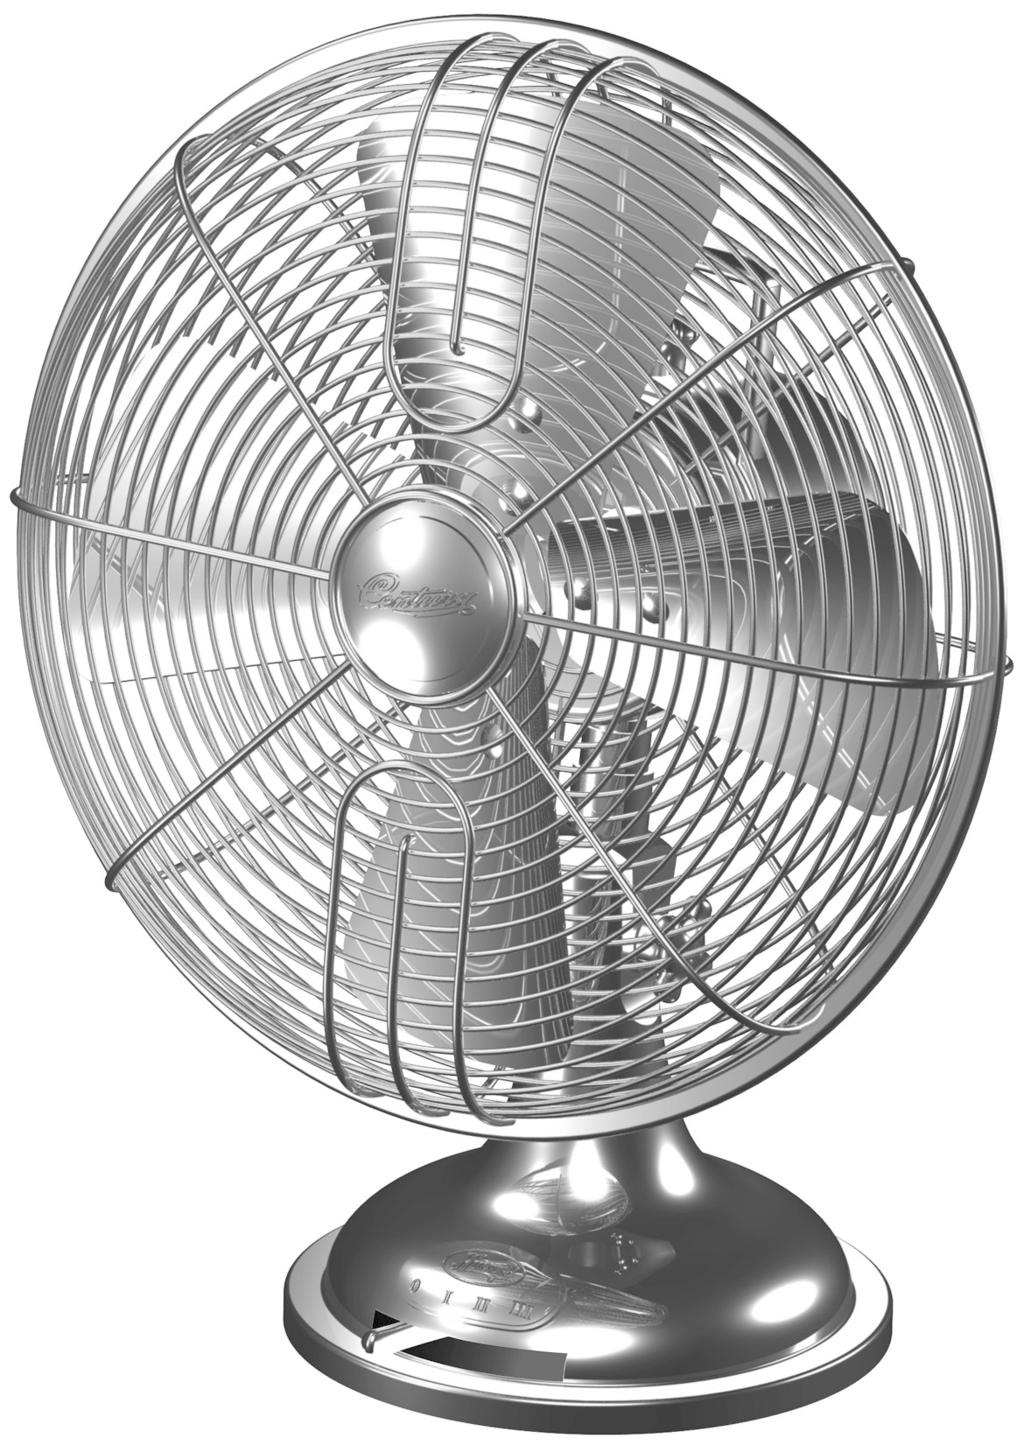 The CENTURY High Performance Oscillating Fan OWNER S GUIDE FOR